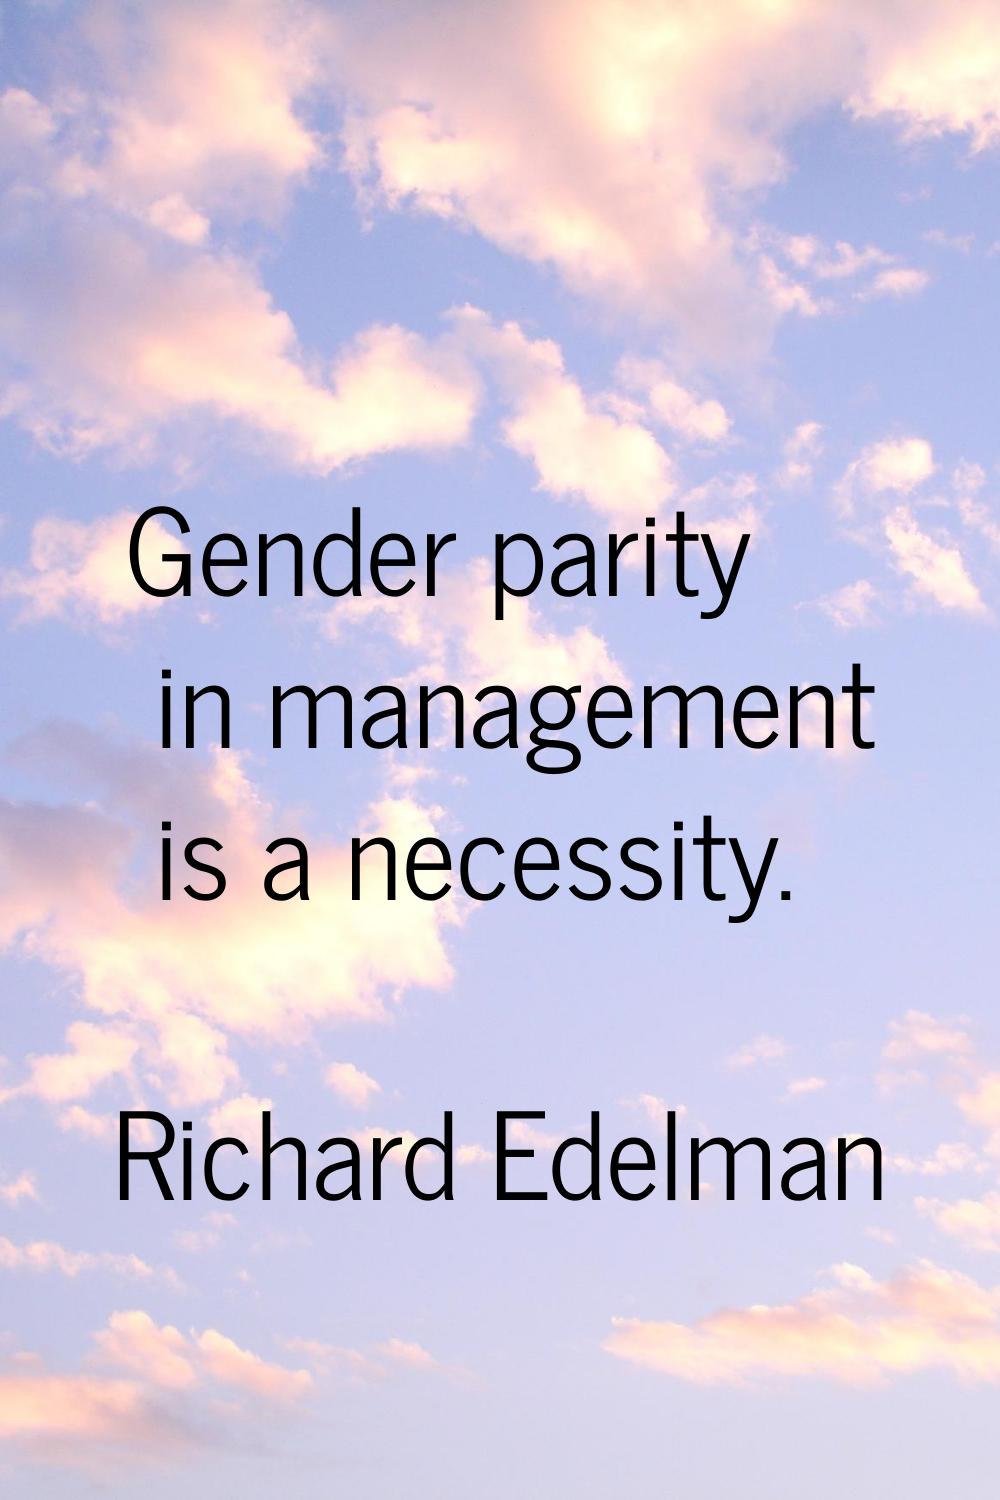 Gender parity in management is a necessity.